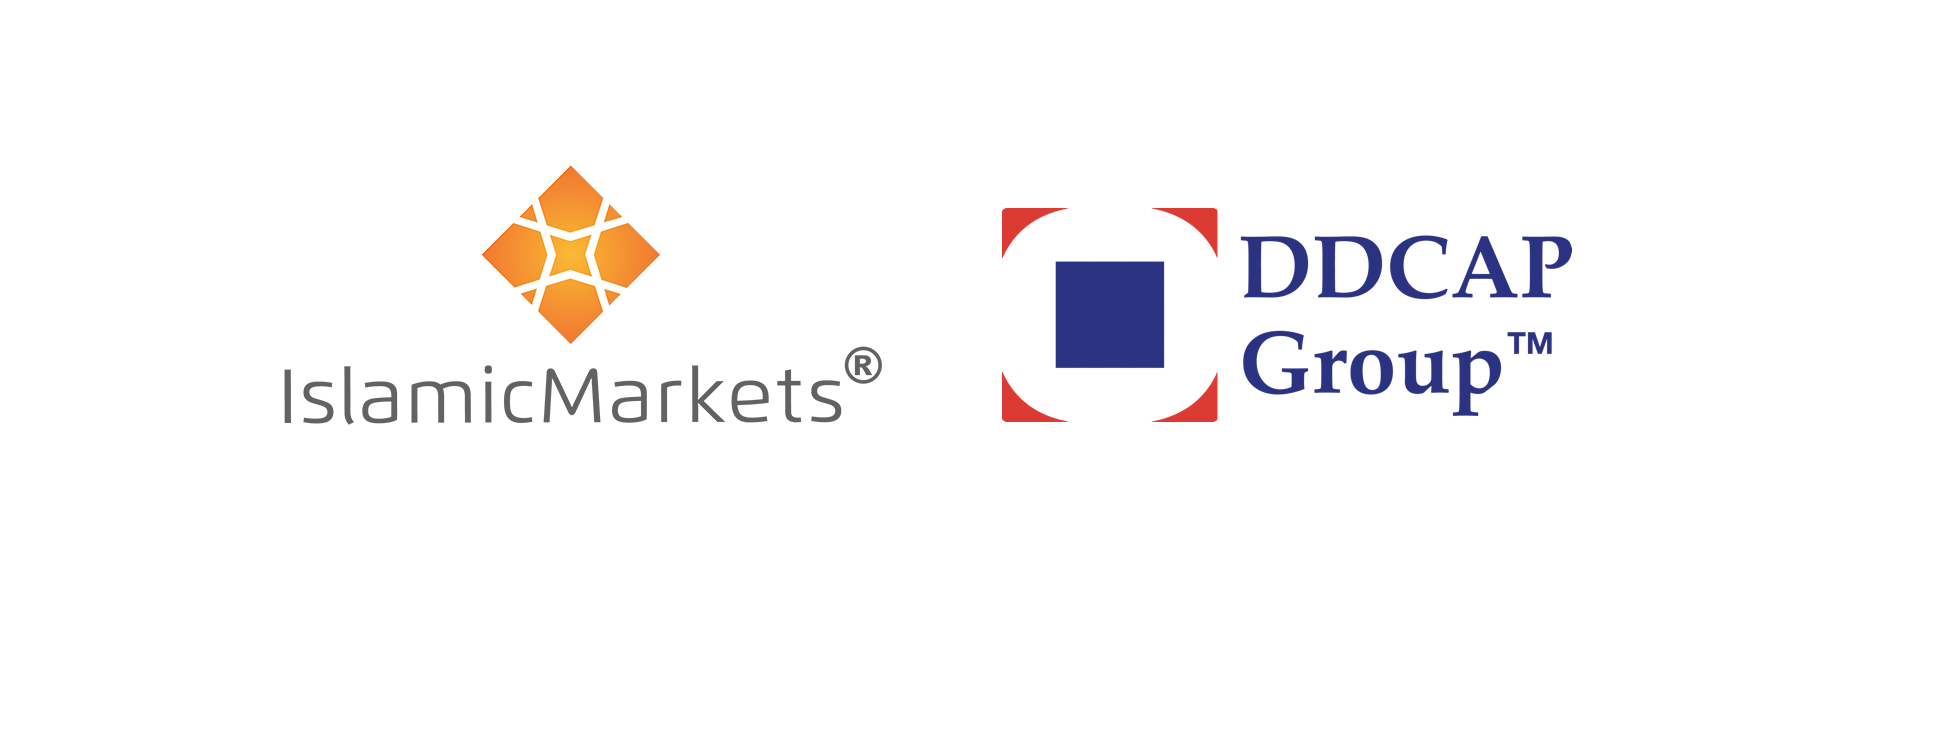 IslamicMarkets.com and DDCAP Strengthen Collaboration with Second Round of Strategic Investment